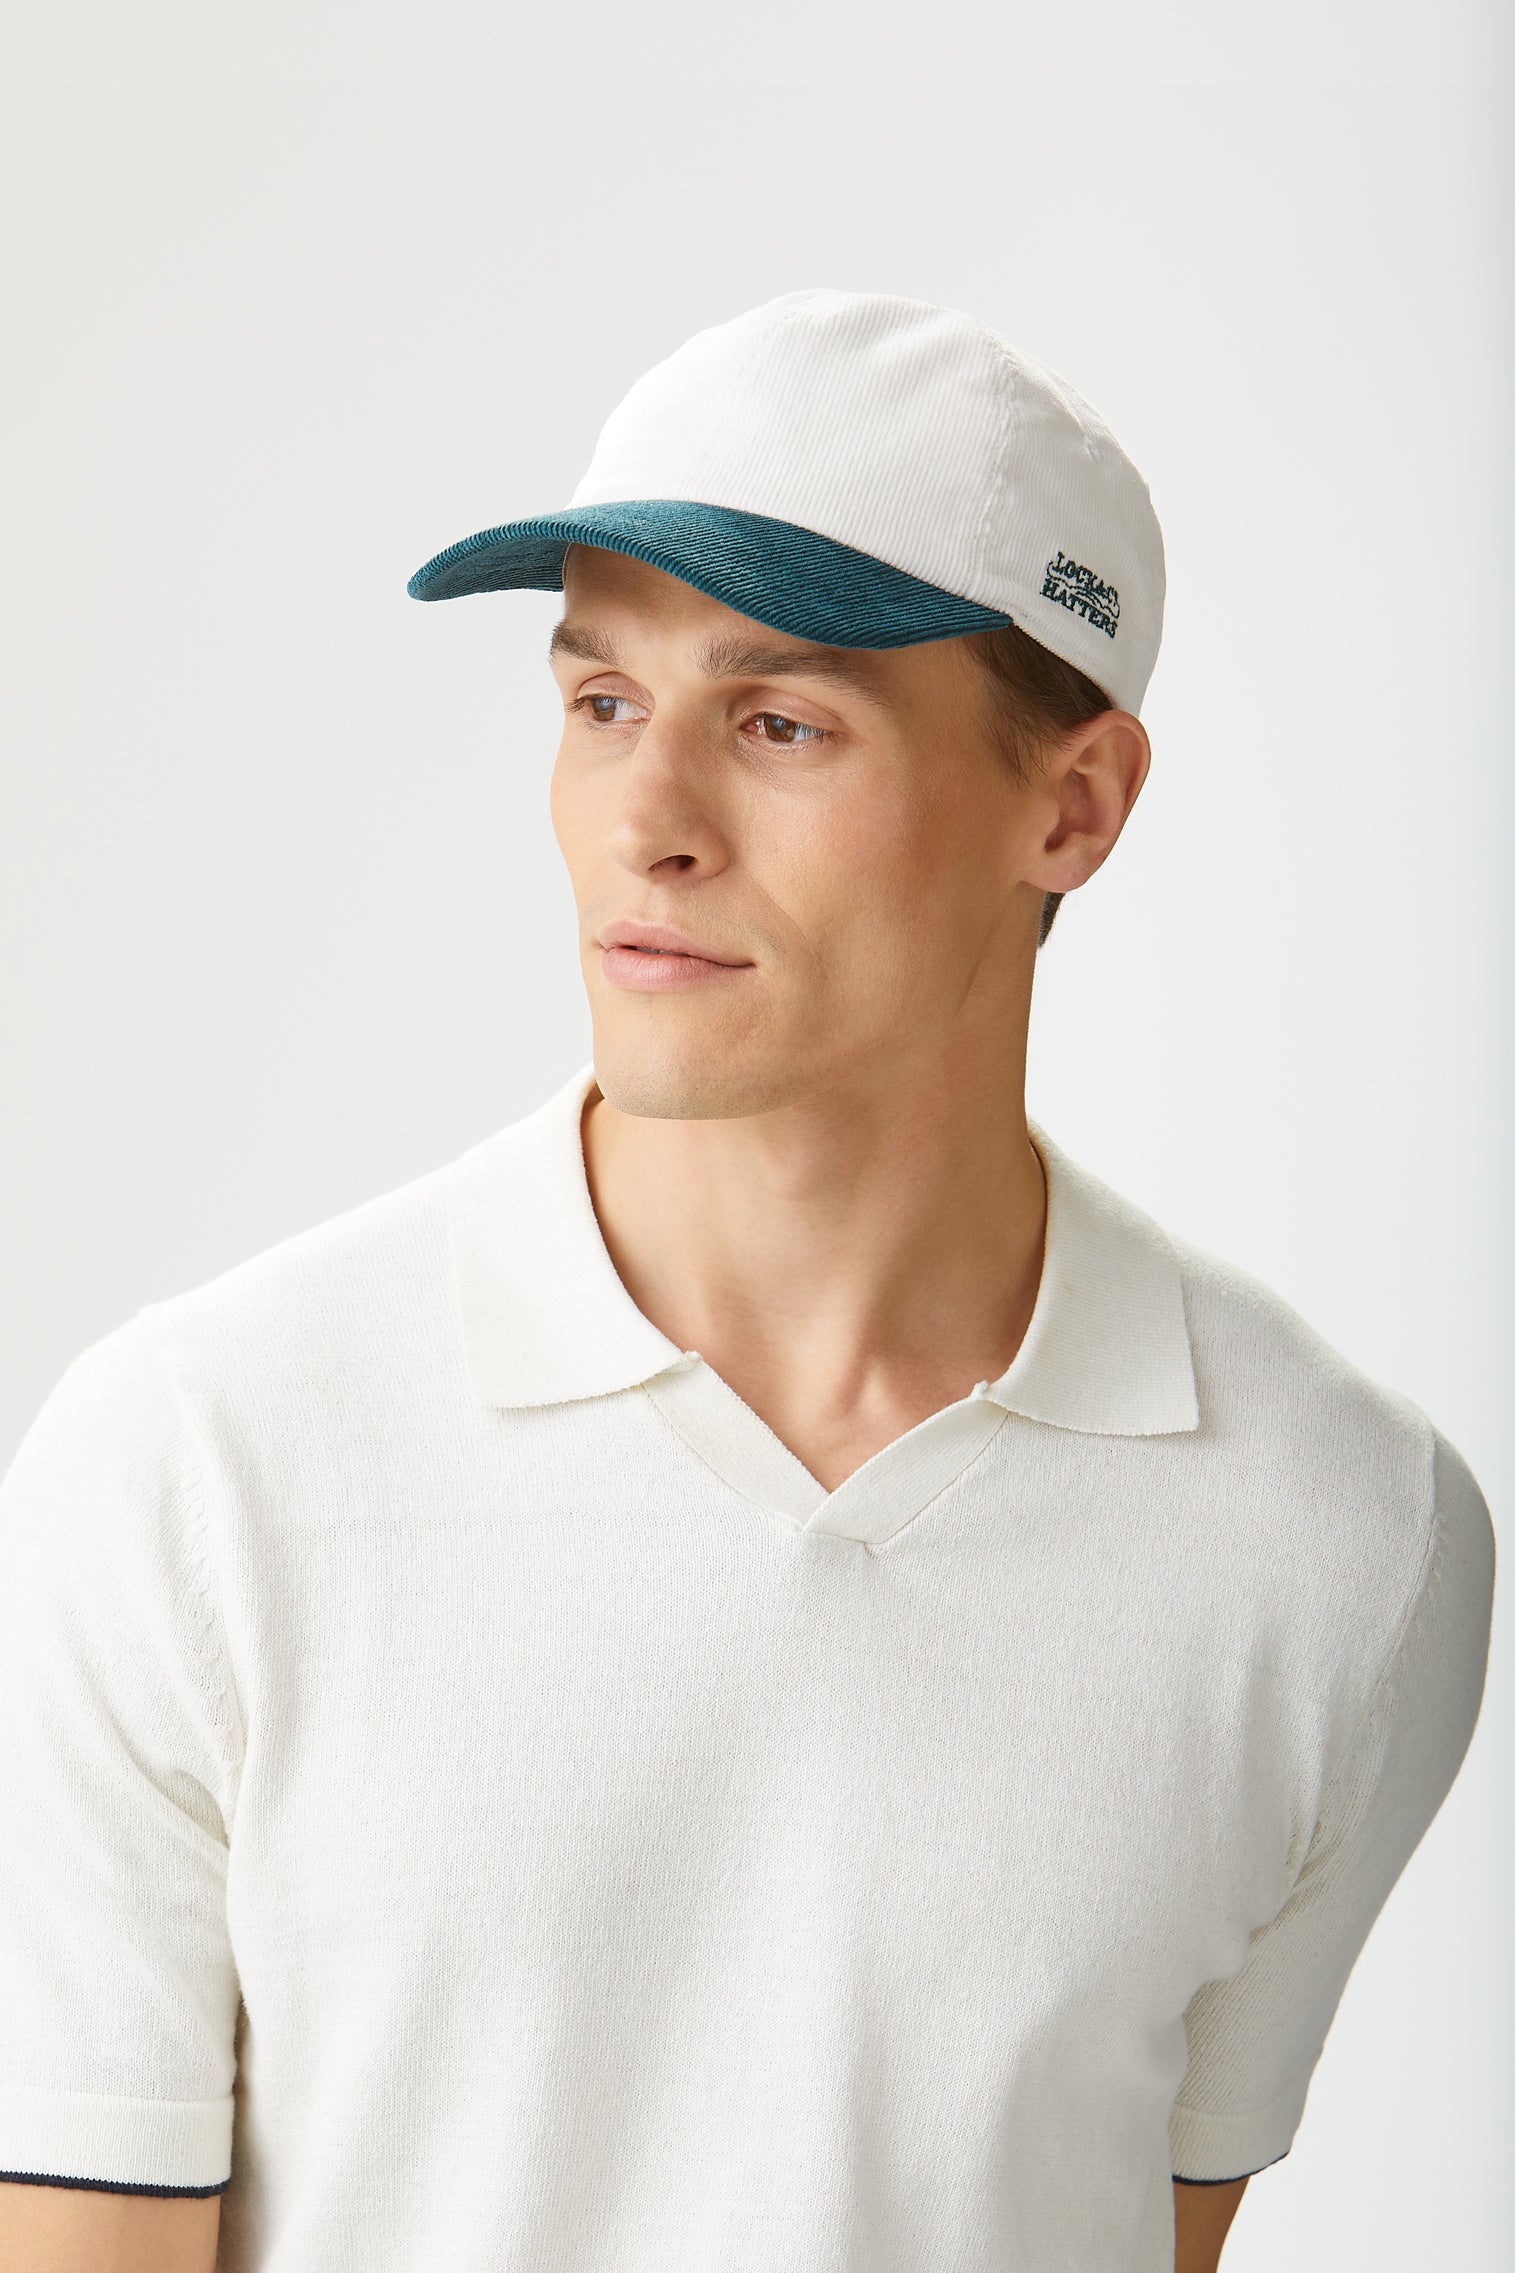 Adjustable Two-Tone Cord Baseball Cap - Products - Lock & Co. Hatters London UK